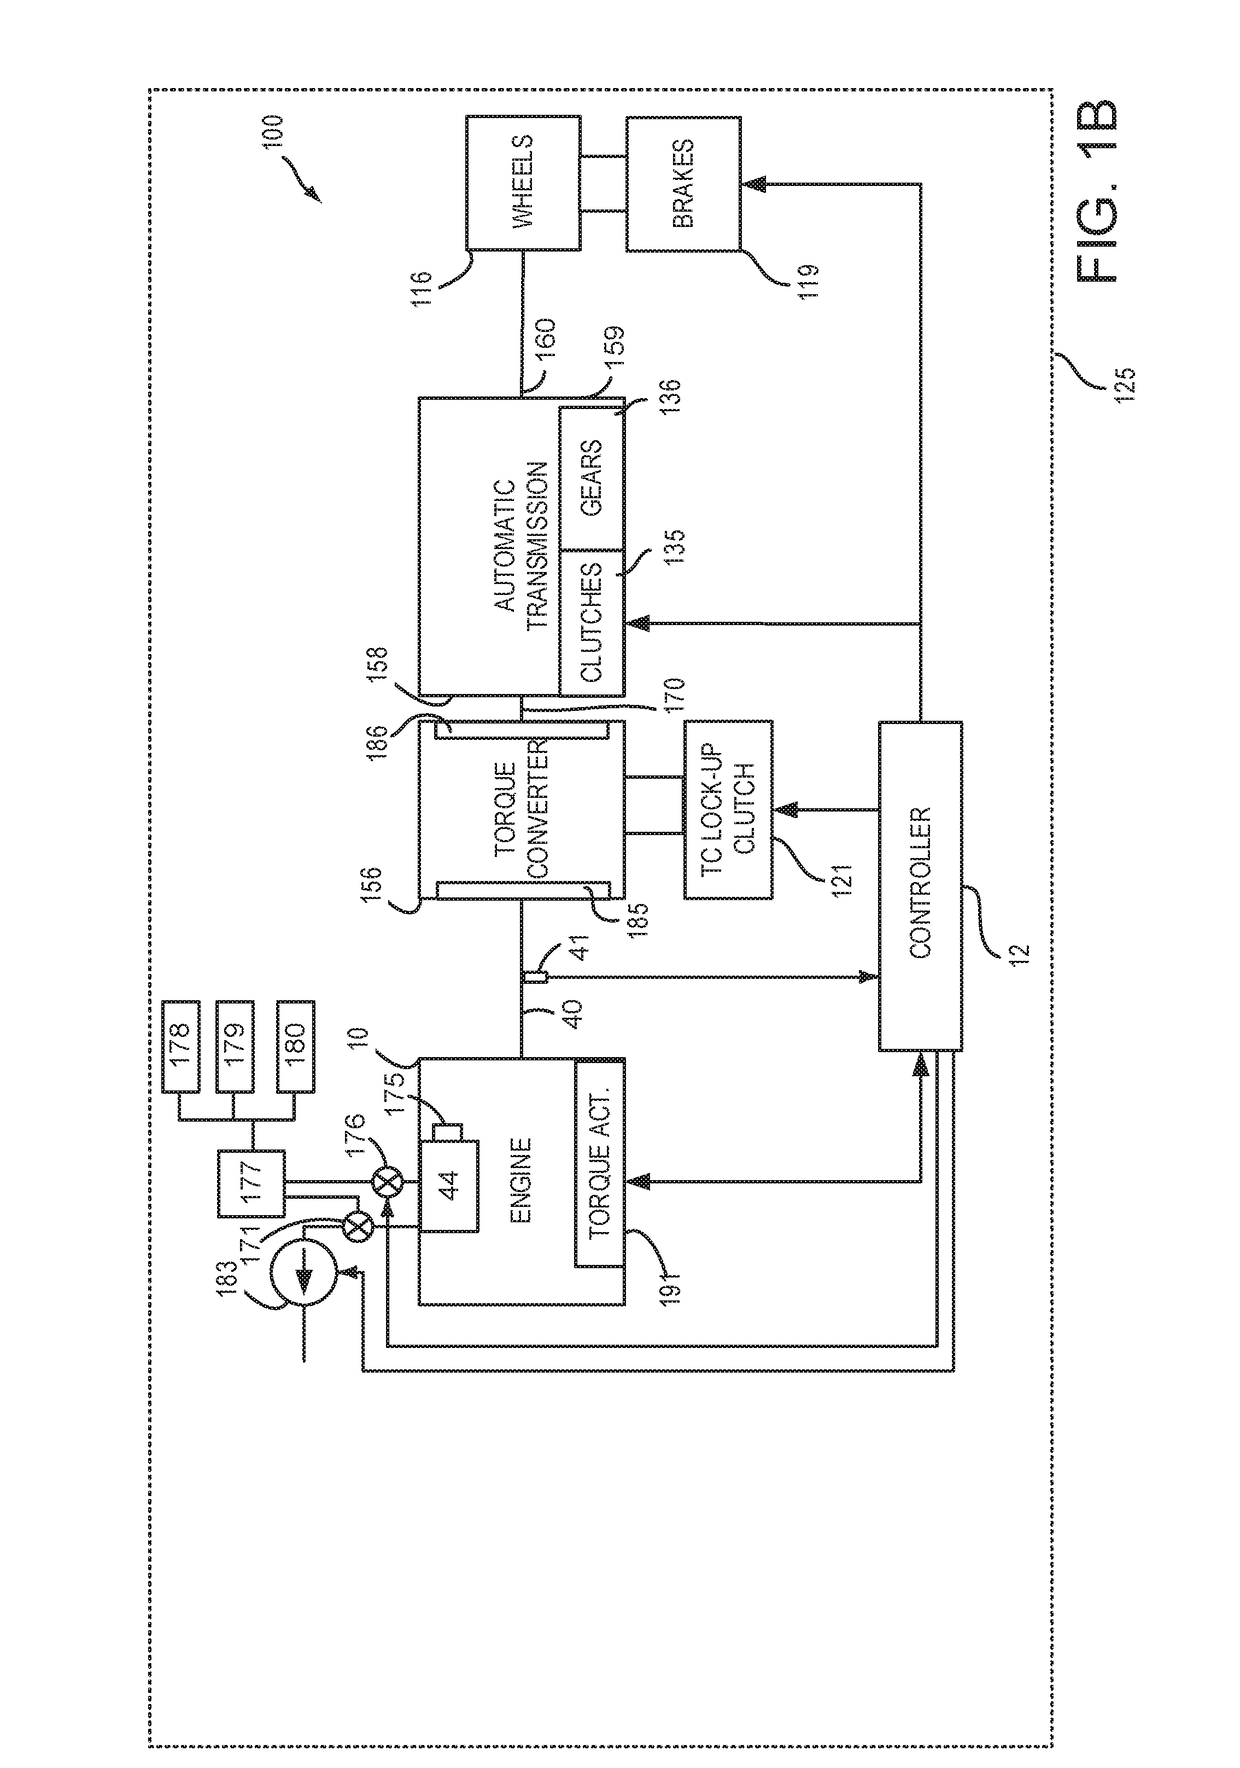 System for method for controlling engine knock of a variable displacement engine